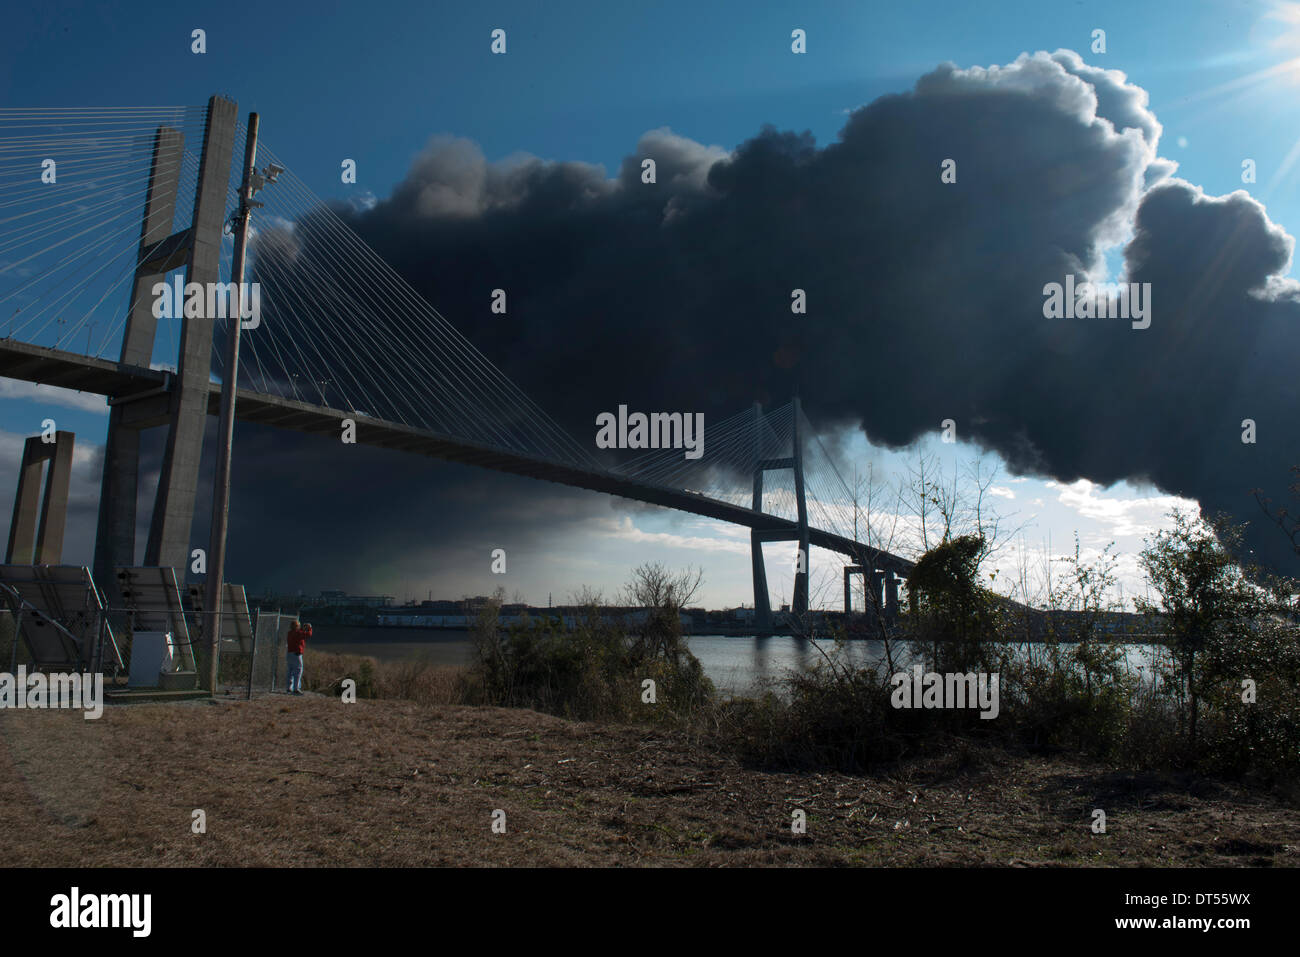 Savannah, Georgia, USA. 8th Fen, 2014. Onlooker photographs the rising smoke from a warehouse fire at the Port of Savannah in Savannah, Georgia, U.S.A., on Saturday, February 8, 2014. Firefighters worked to contain and extinguish the blaze that erupted at the port’s Ocean Terminal not far from downtown Savannah. Credit:  JT Blatty/Alamy Live News Stock Photo